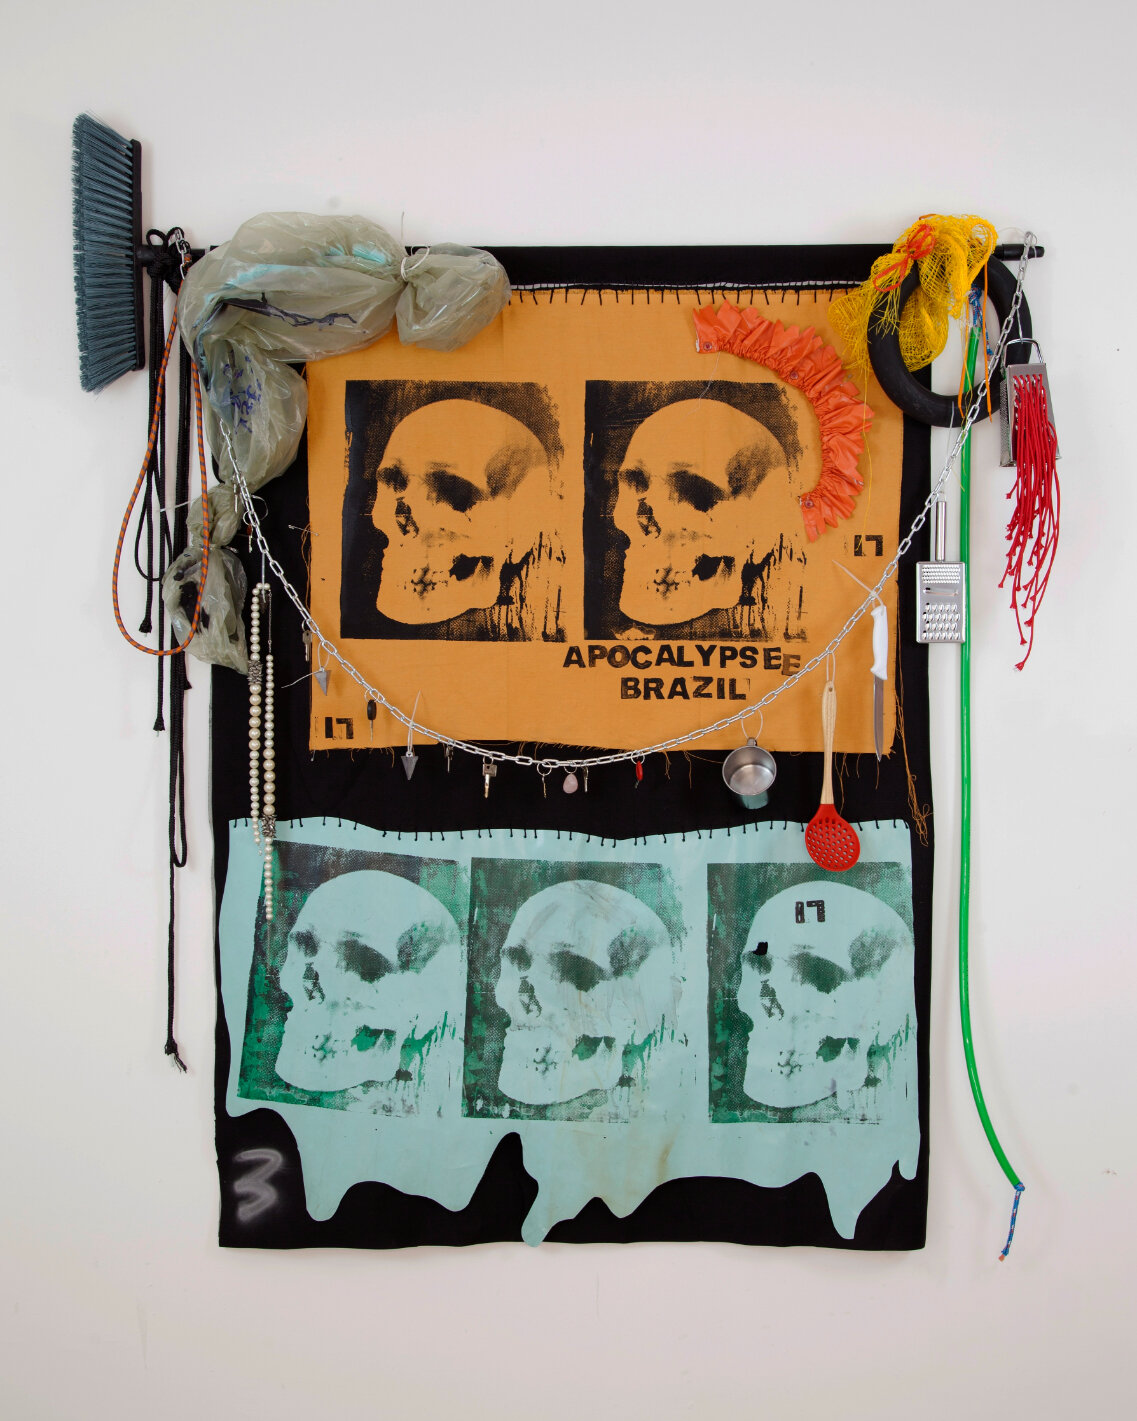  Randolpho Lamonier&nbsp;  O porta bandeira do apocalypse (The flag bearer of apocalypse) , 2021&nbsp; Mixed media (Silkscreen and stamp on leather and fabric, rope, chains, plastic, broom and objects)  77 x 67 in.&nbsp; RL006     